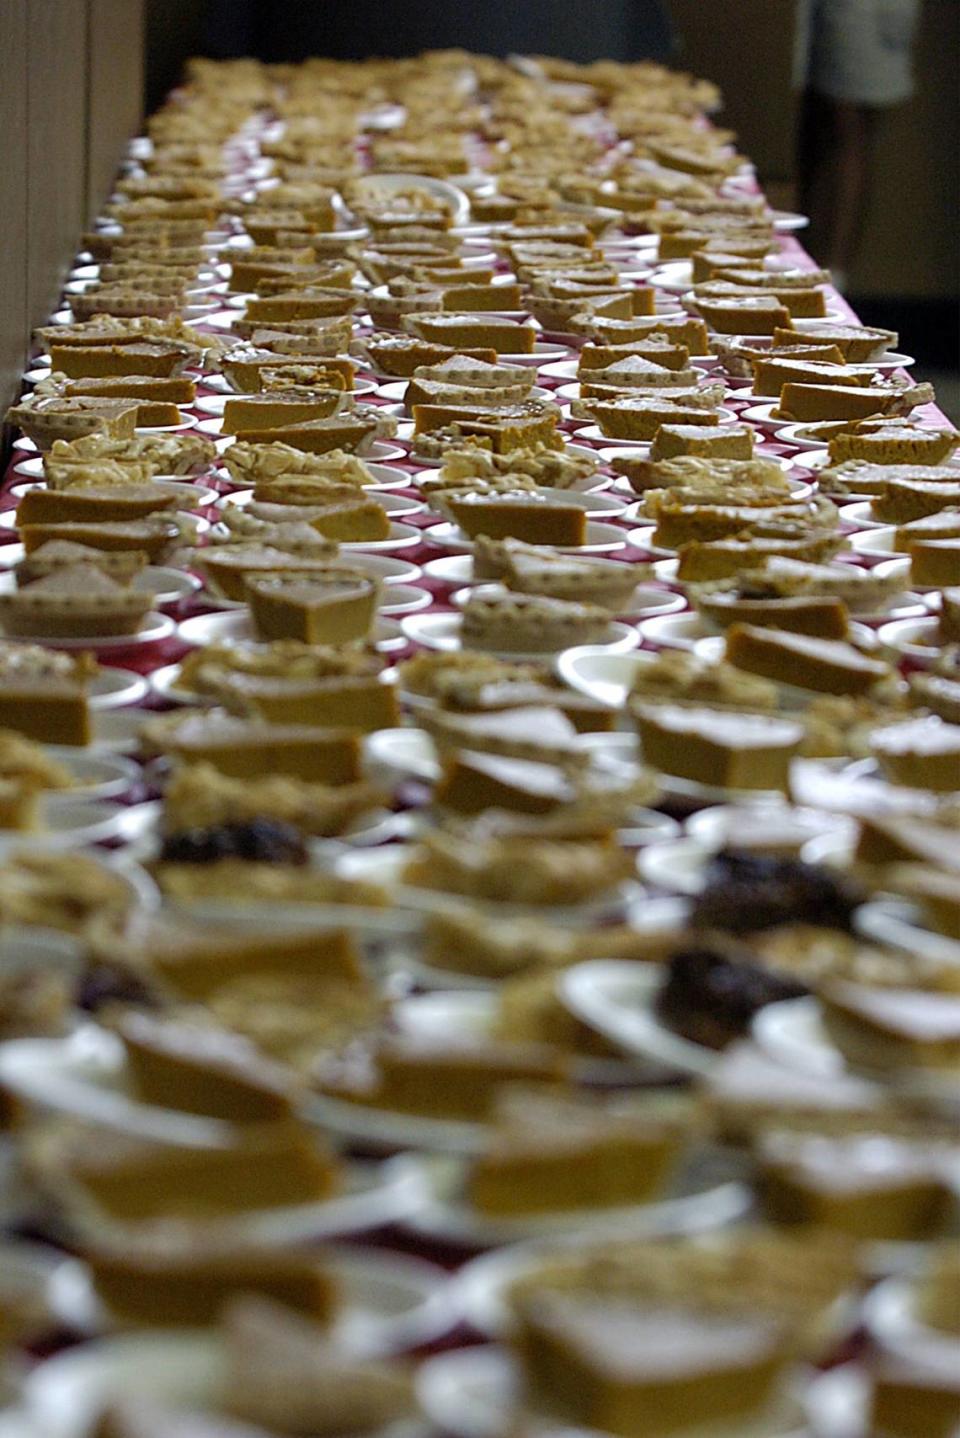 These aren’t this year’s pies (in fact they are from Thanksgiving a few years ago), but the Salvation Army promises “pies as far as the eye can see” for their Christmas day meal this year.